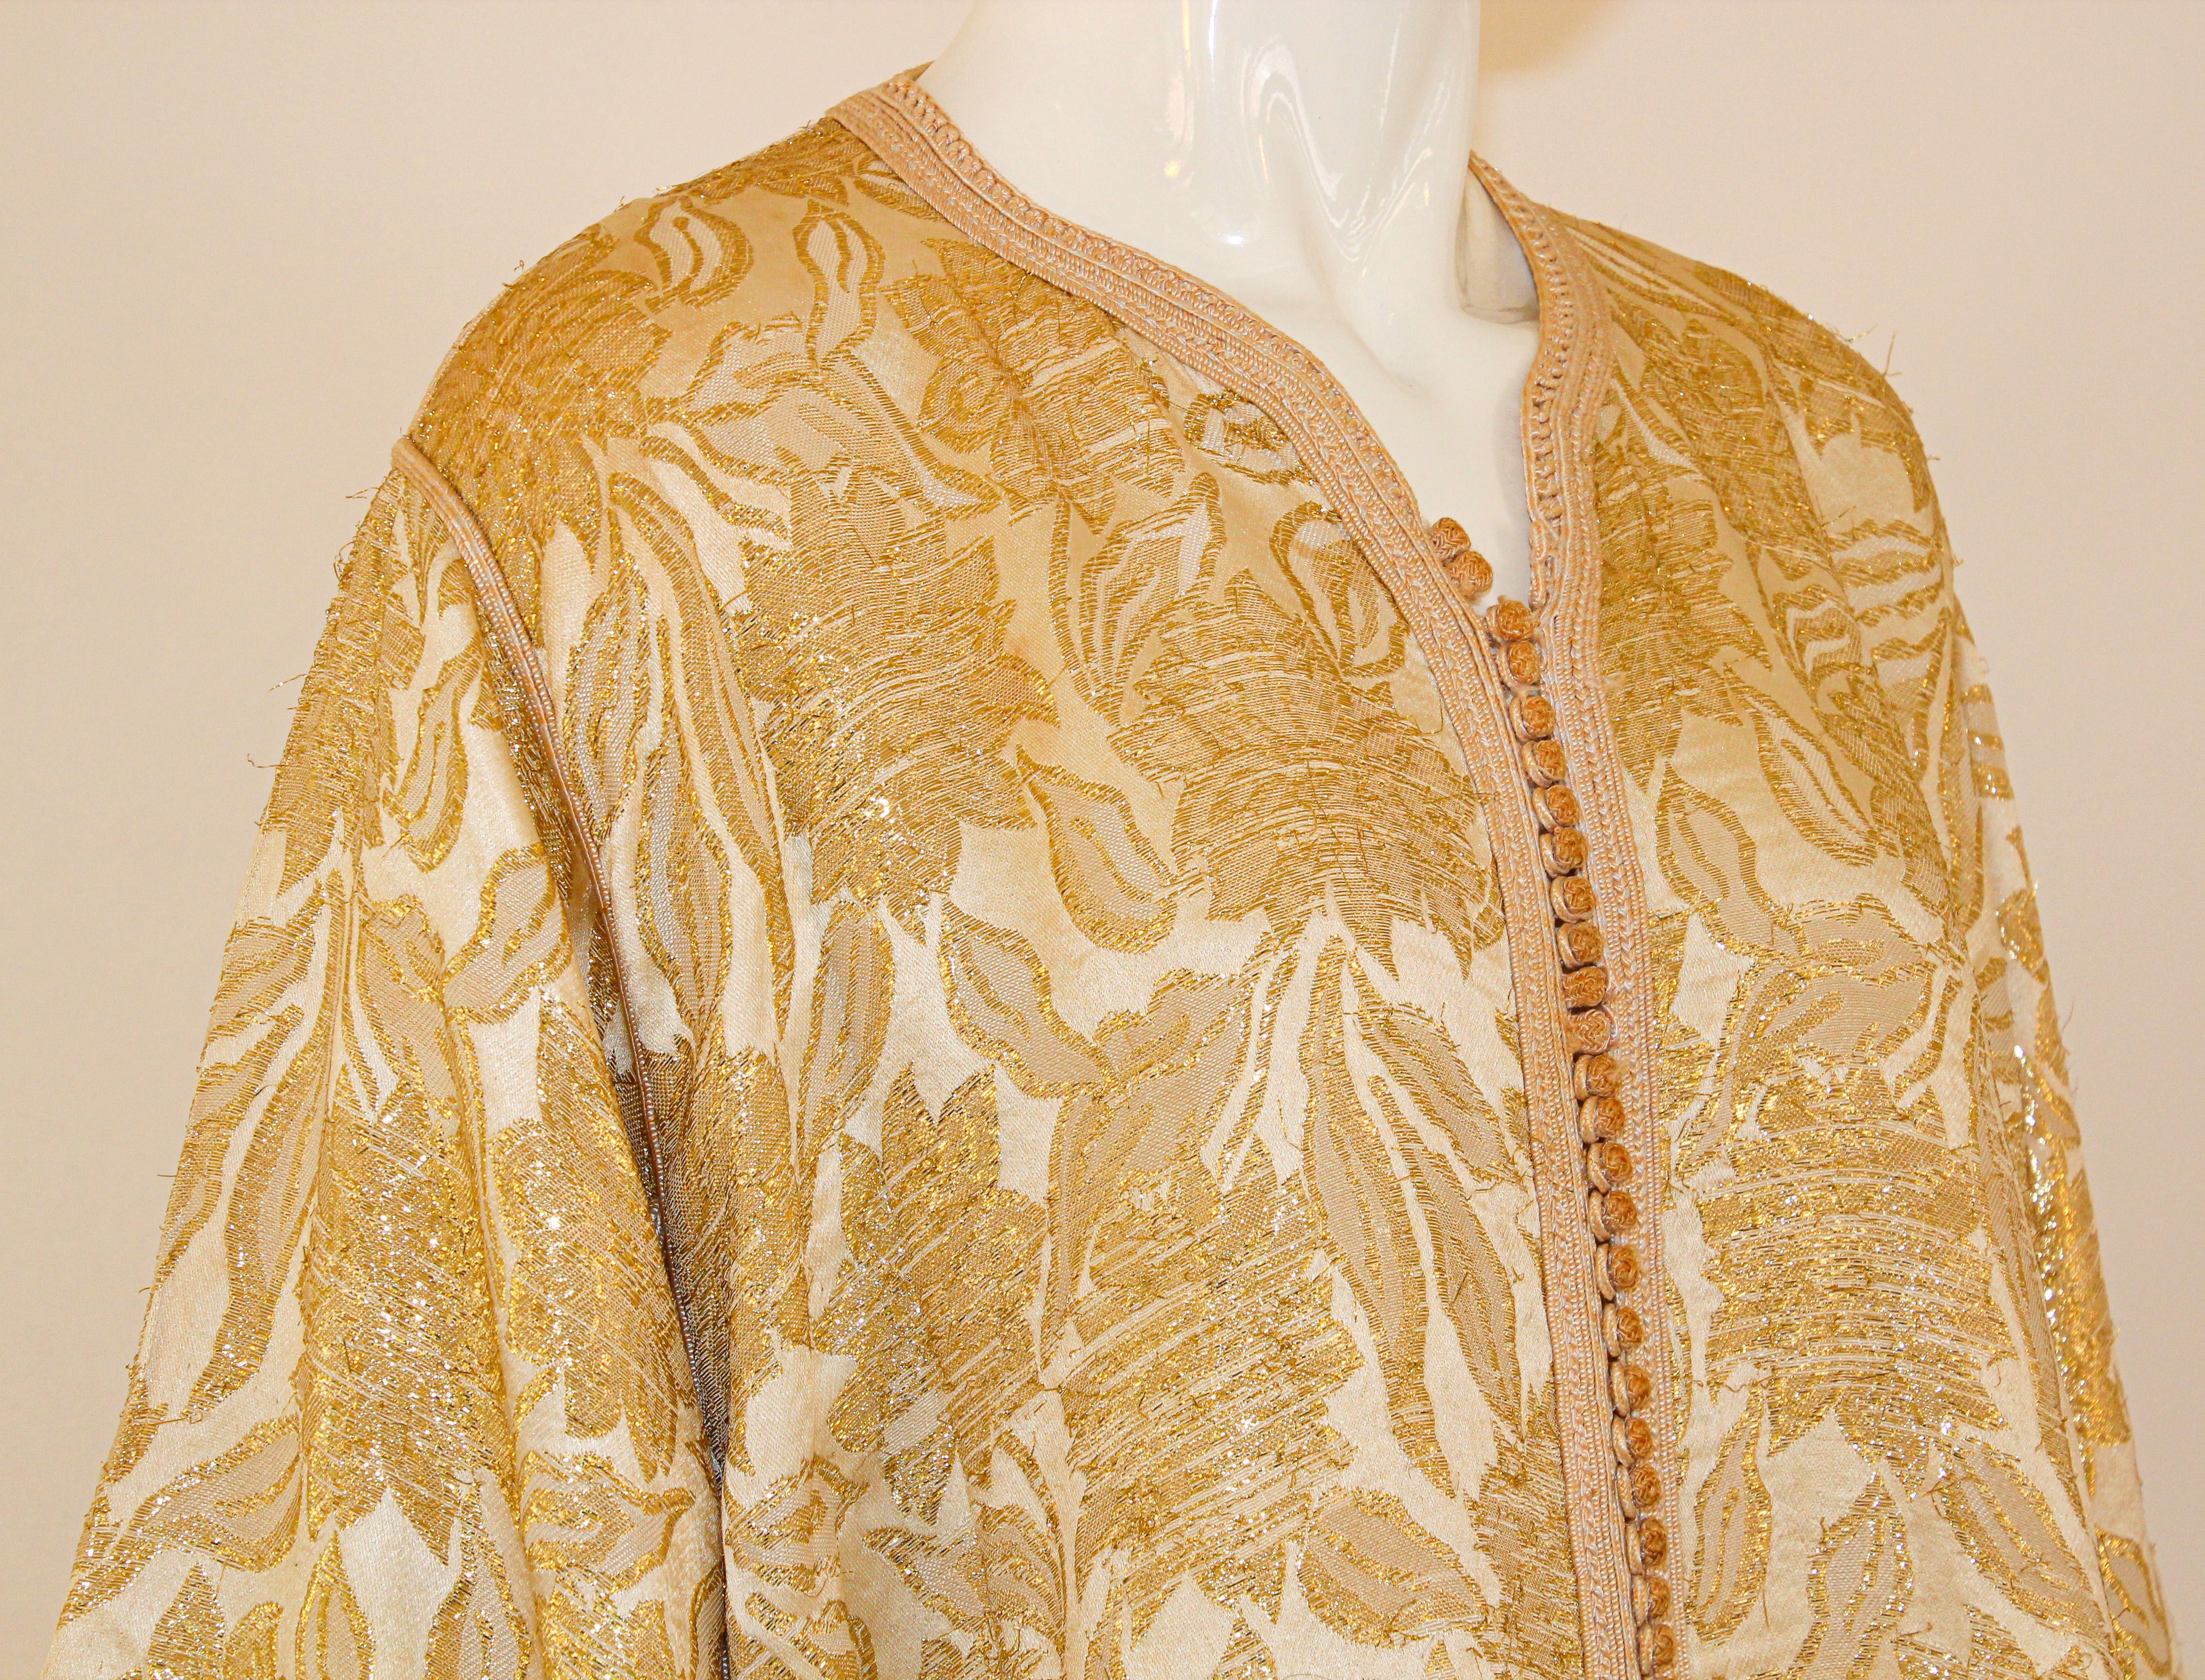 1940s Moroccan Antique Caftan Gold Damask Embroidered Caftan Maxi Dress For Sale 2